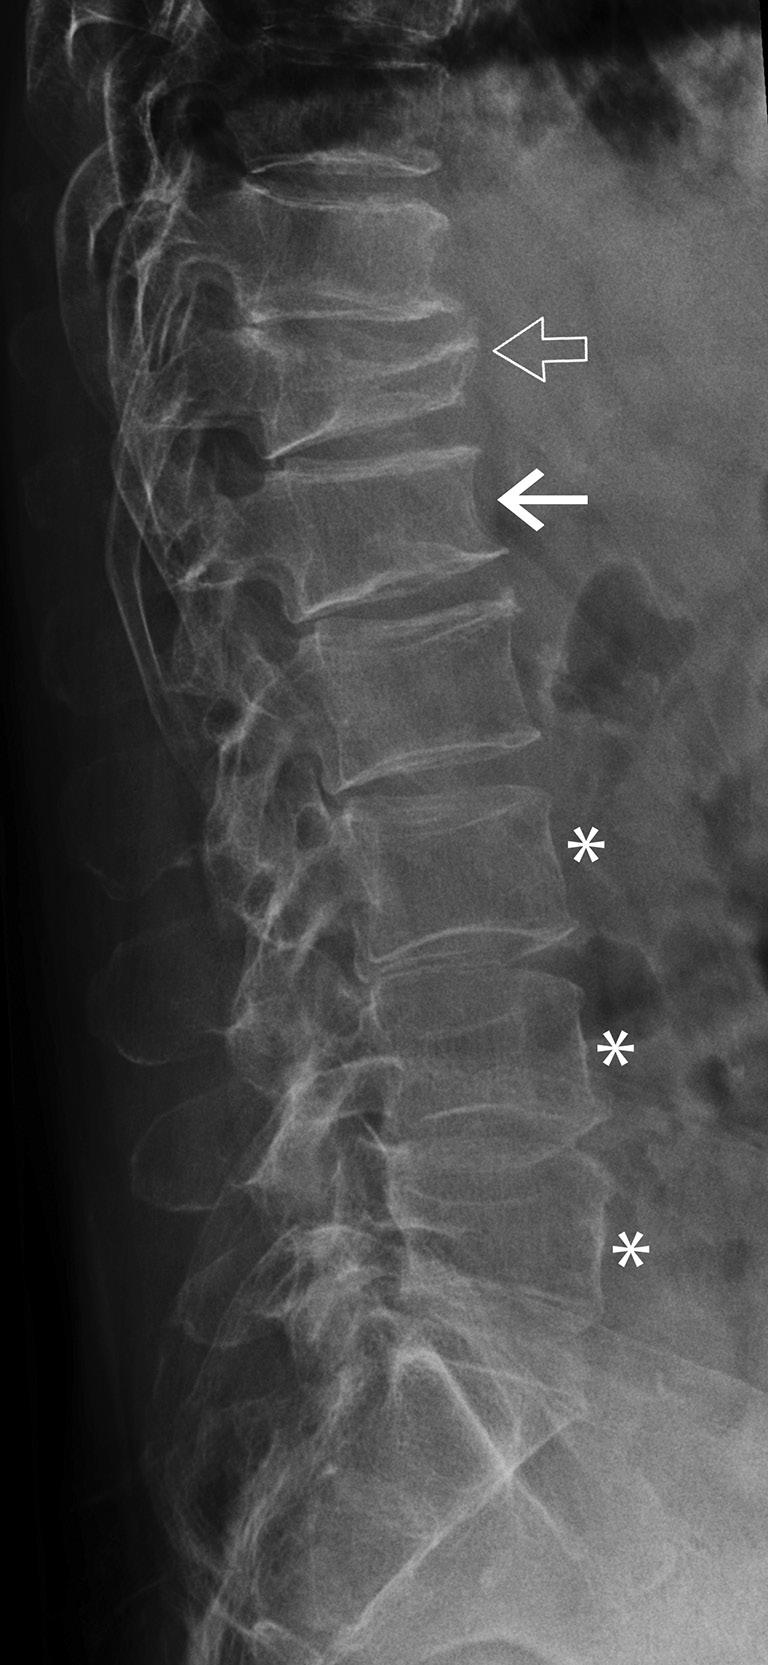 Quantitative Imaging in Medicine and Surgery, Vol 5, No 4 August 2015 597 Figure 6 There is a severe osteoporotic fracture of the T12 vertebral body (open arrow) with a mild osteoporotic fracture of